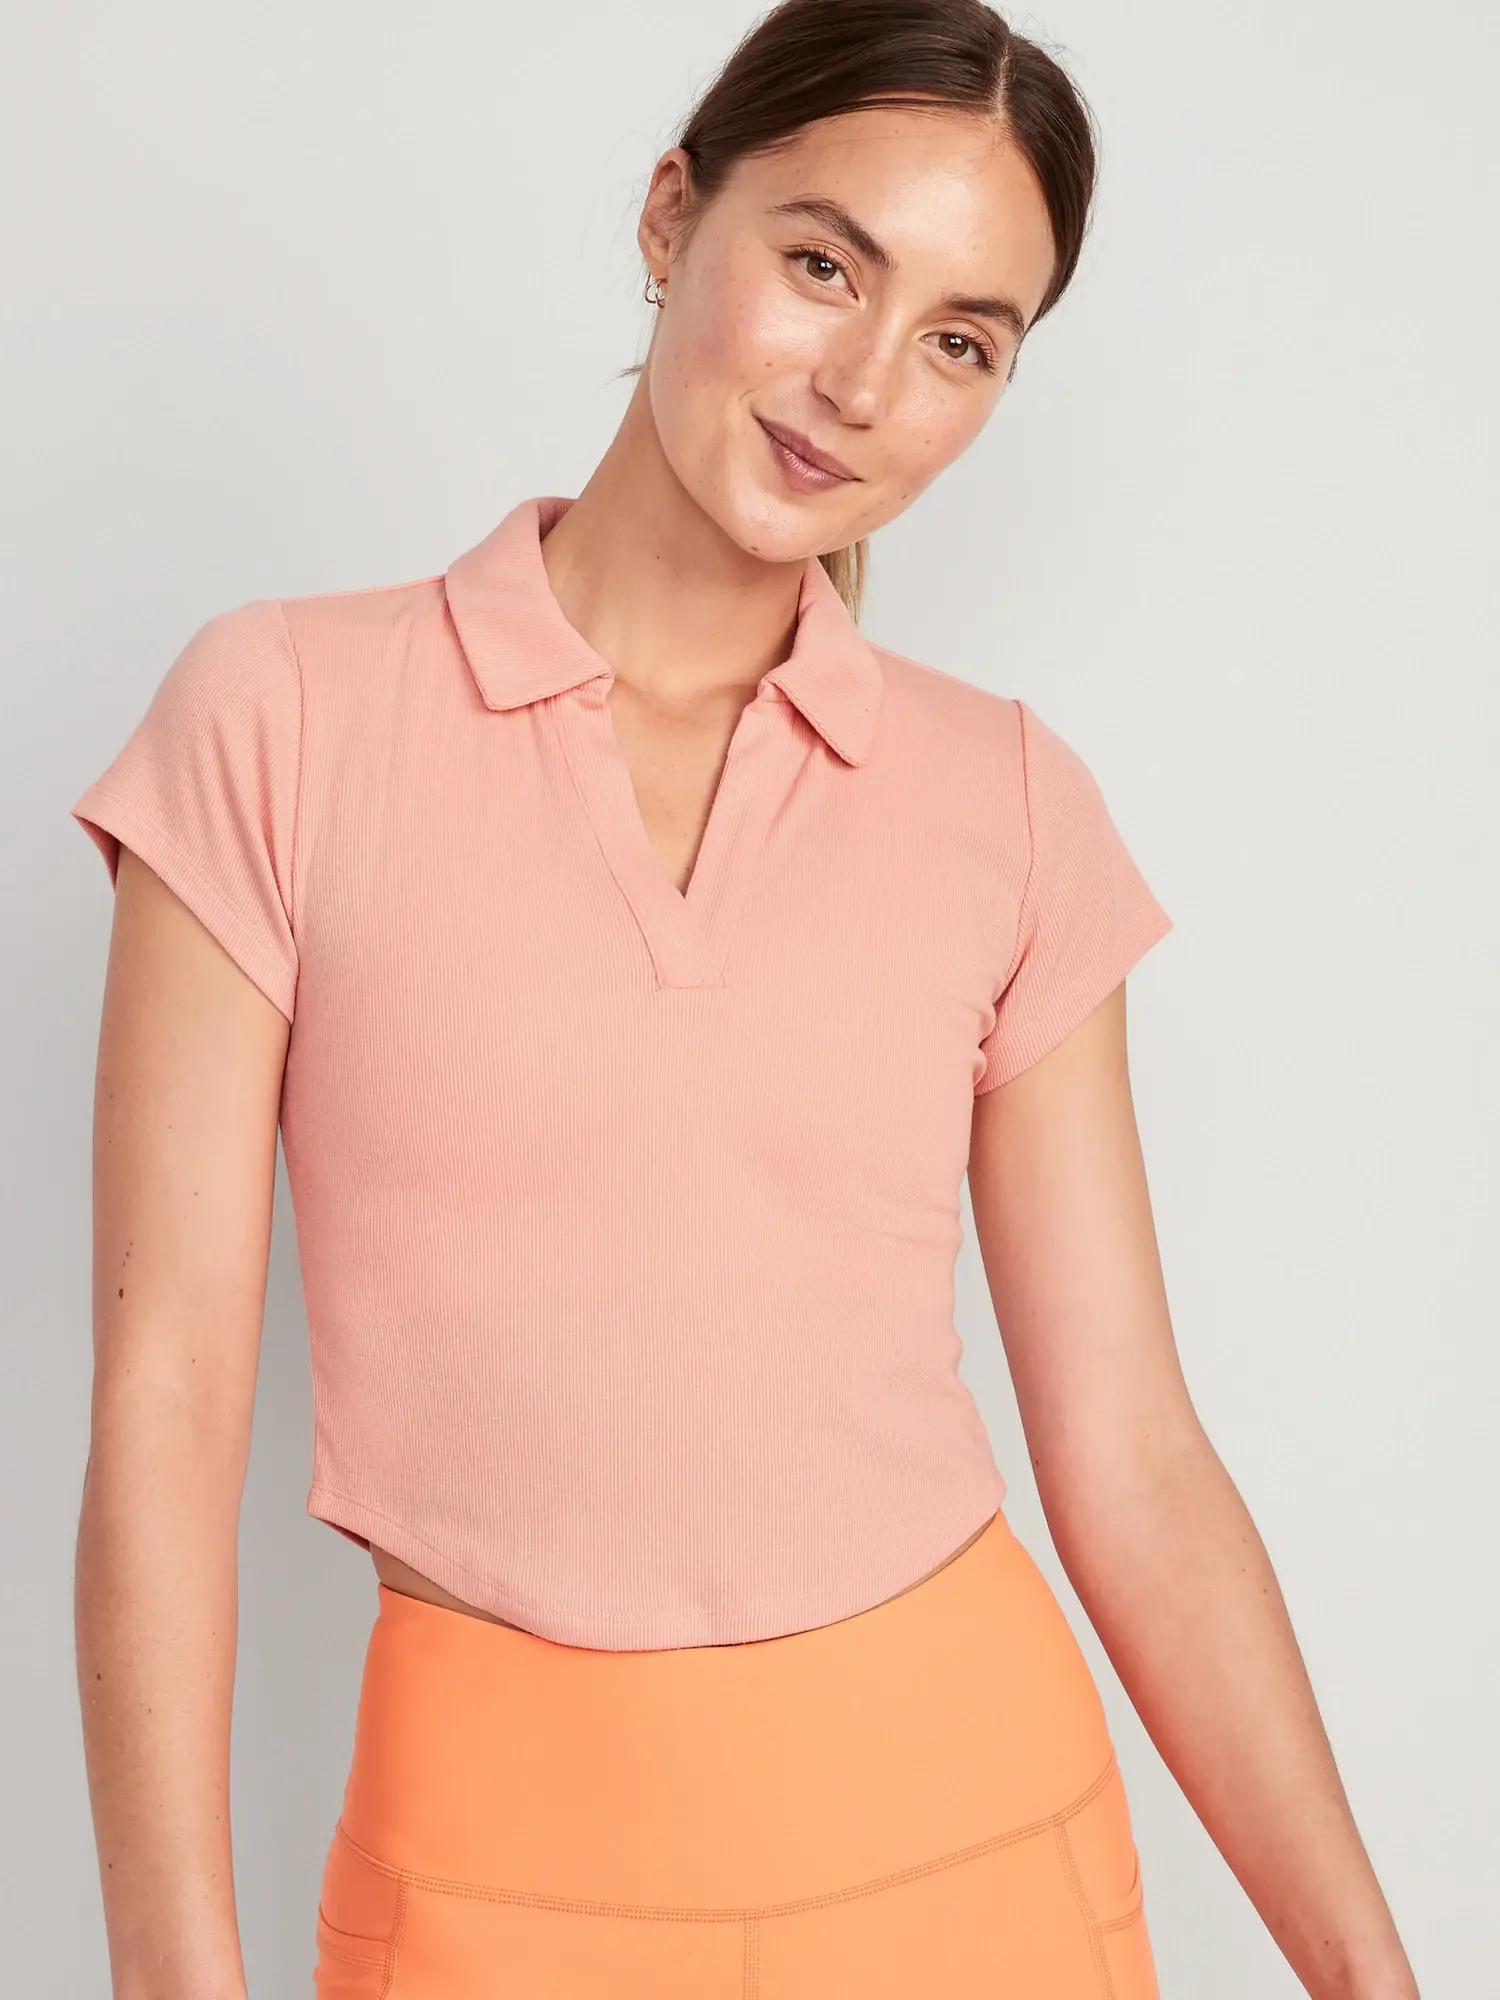 Old Navy UltraLite Rib-Knit Cropped Polo Shirt for Women pink. 1